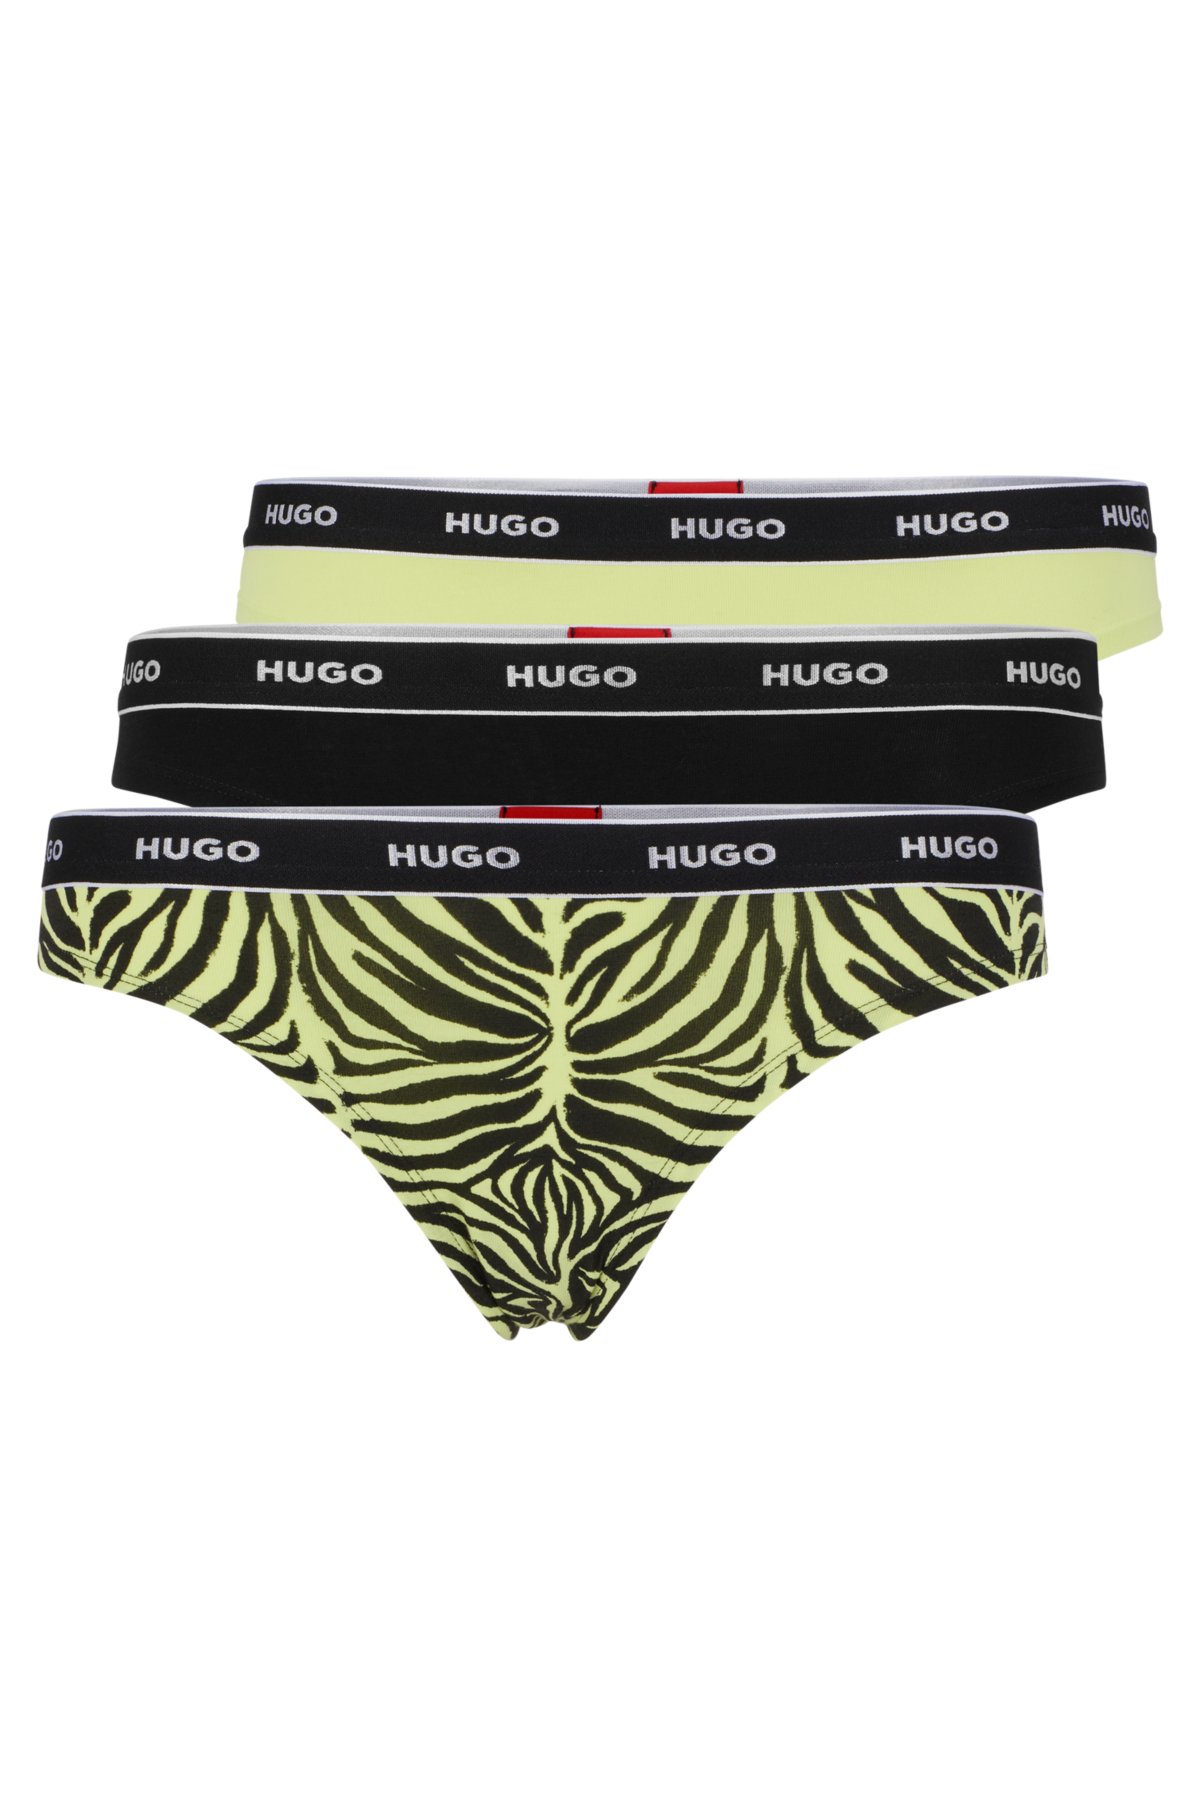 Latest Men's Stretchy Briefs with Printed Thong and Low Waist